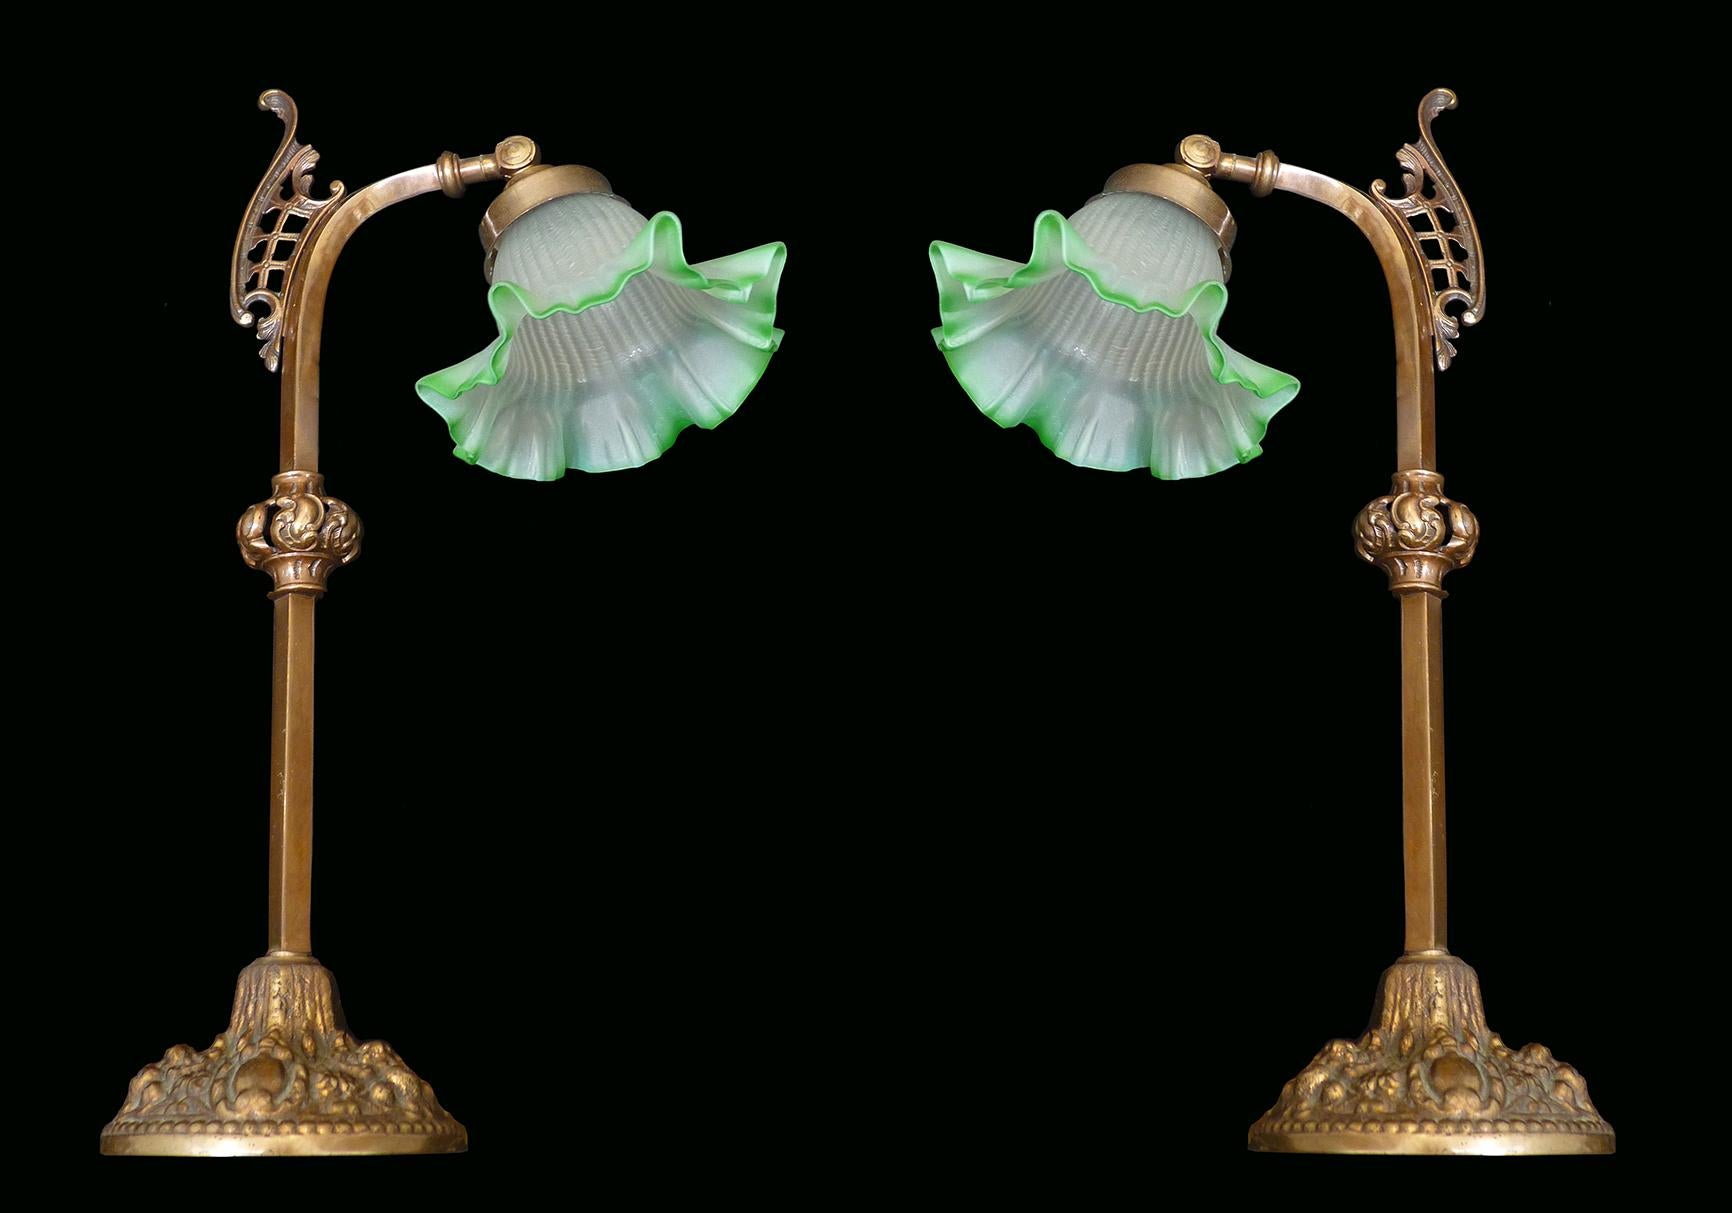 Pair of antique ornate French Art Nouveau/deco frosted satin art glass flower lamp shade Table lamps
Measures:
Diameter 7.1 in/ 18 cm
Height 18,9 in / 48 cm
Weight: 3.5Kg / 8 lb
Age patina
2-light bulbs E14 good working condition/European